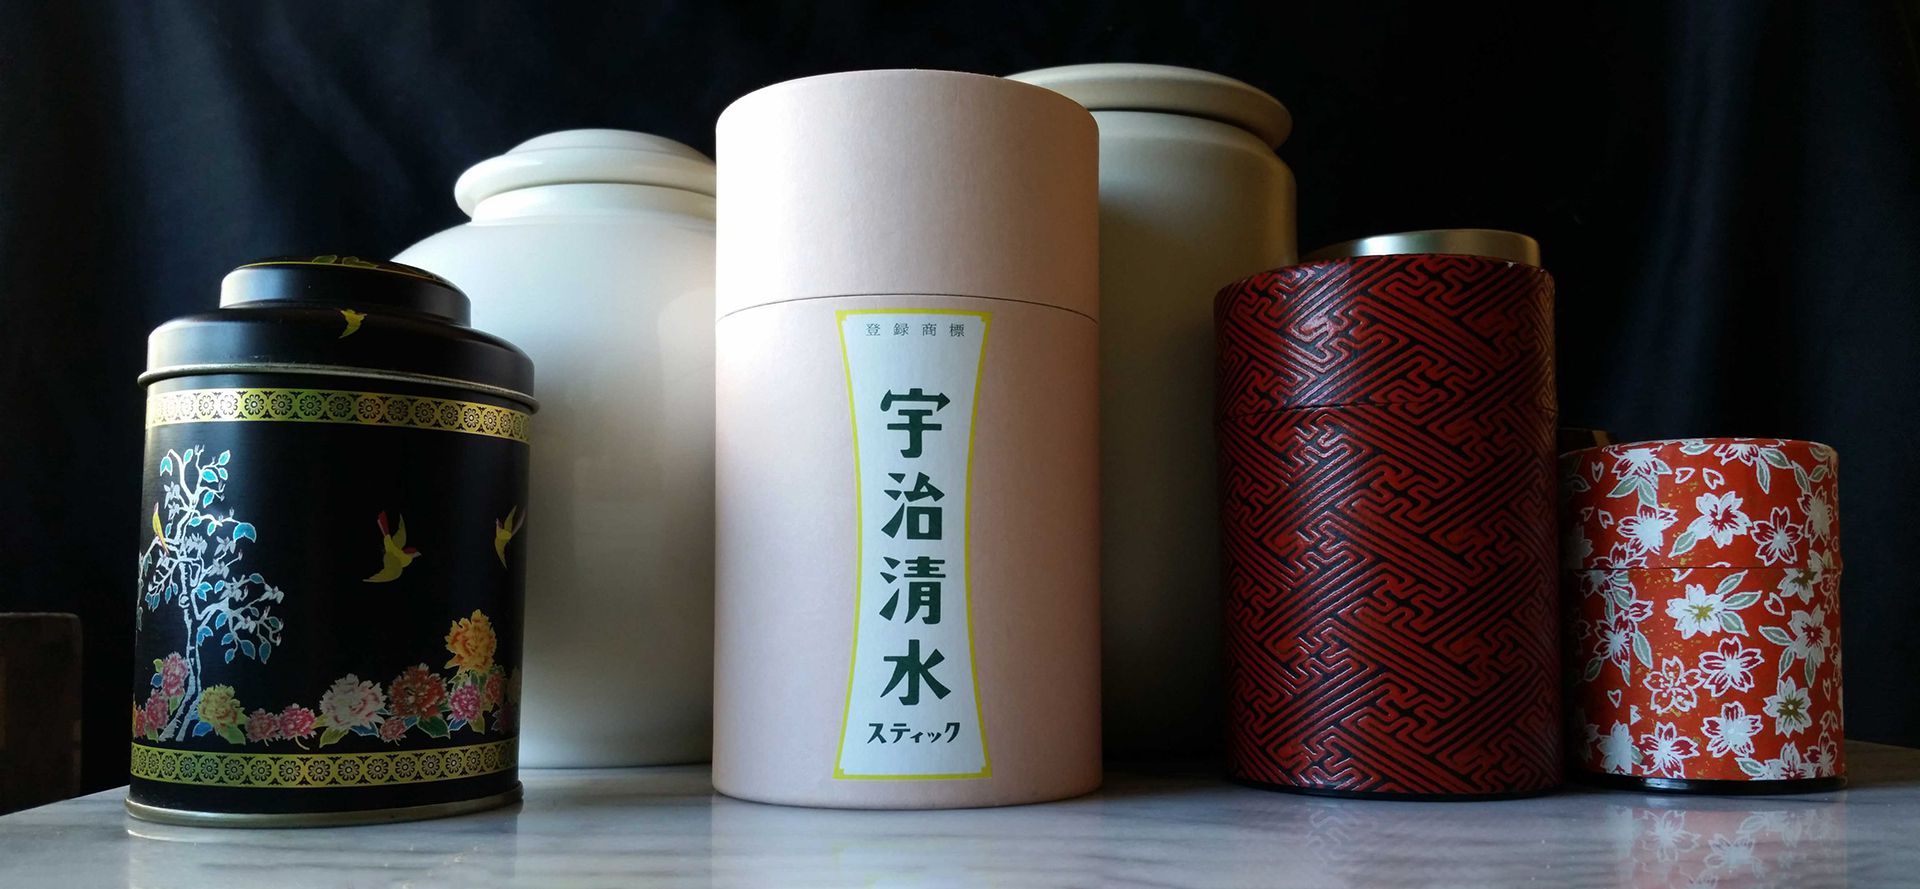 Japanese Tea Containers.